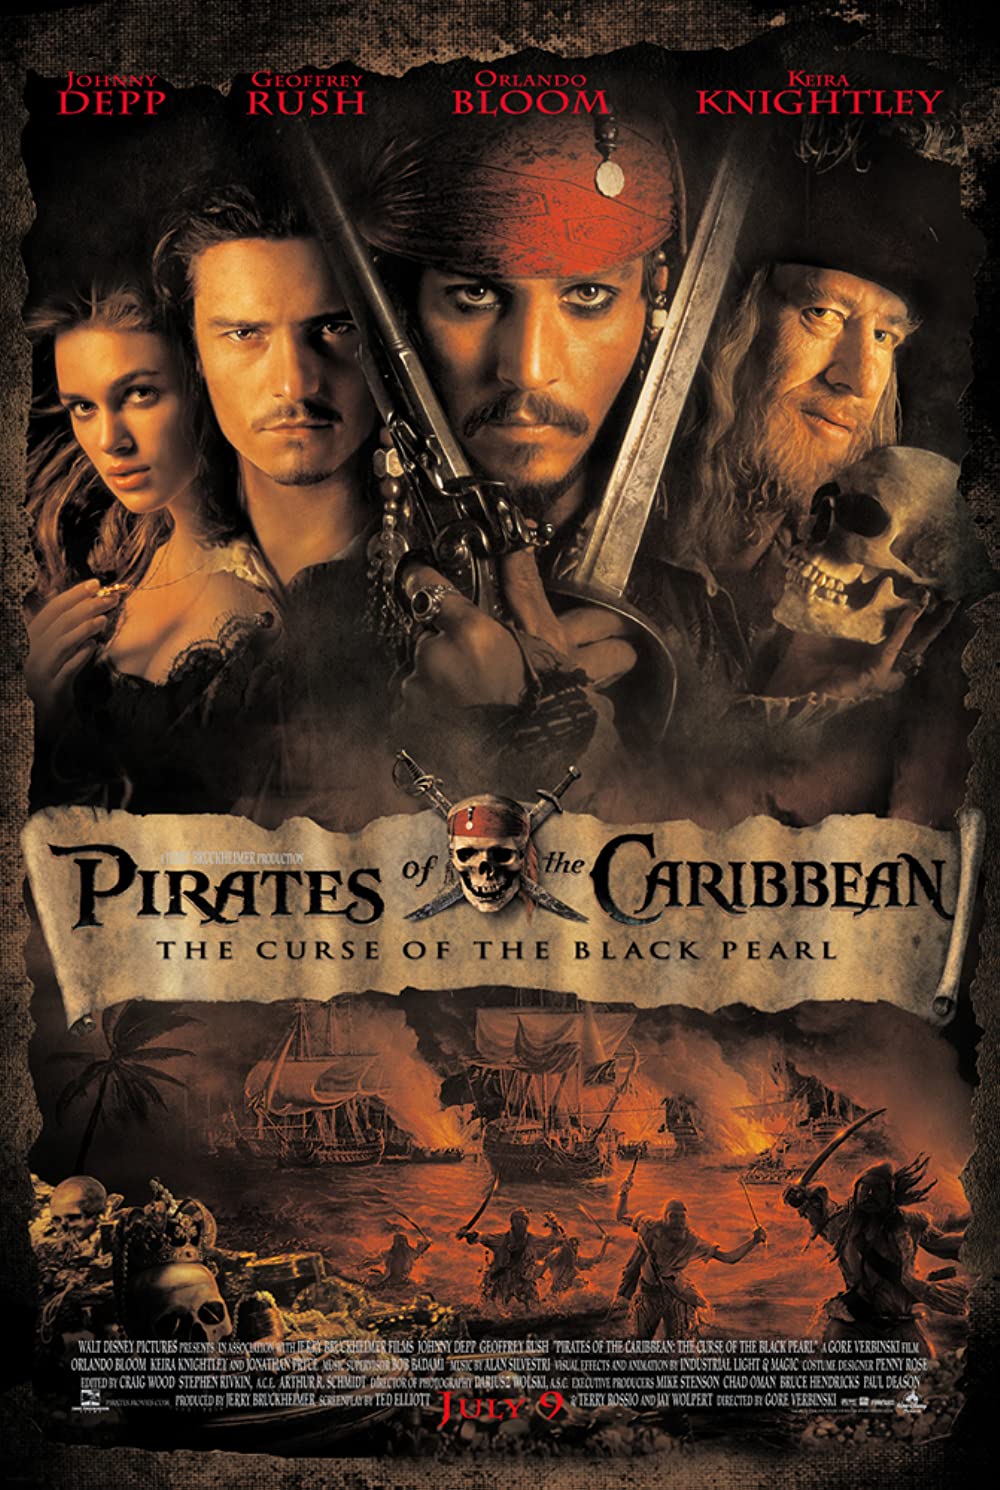 Movies Made Better - Pirates of the Carribean